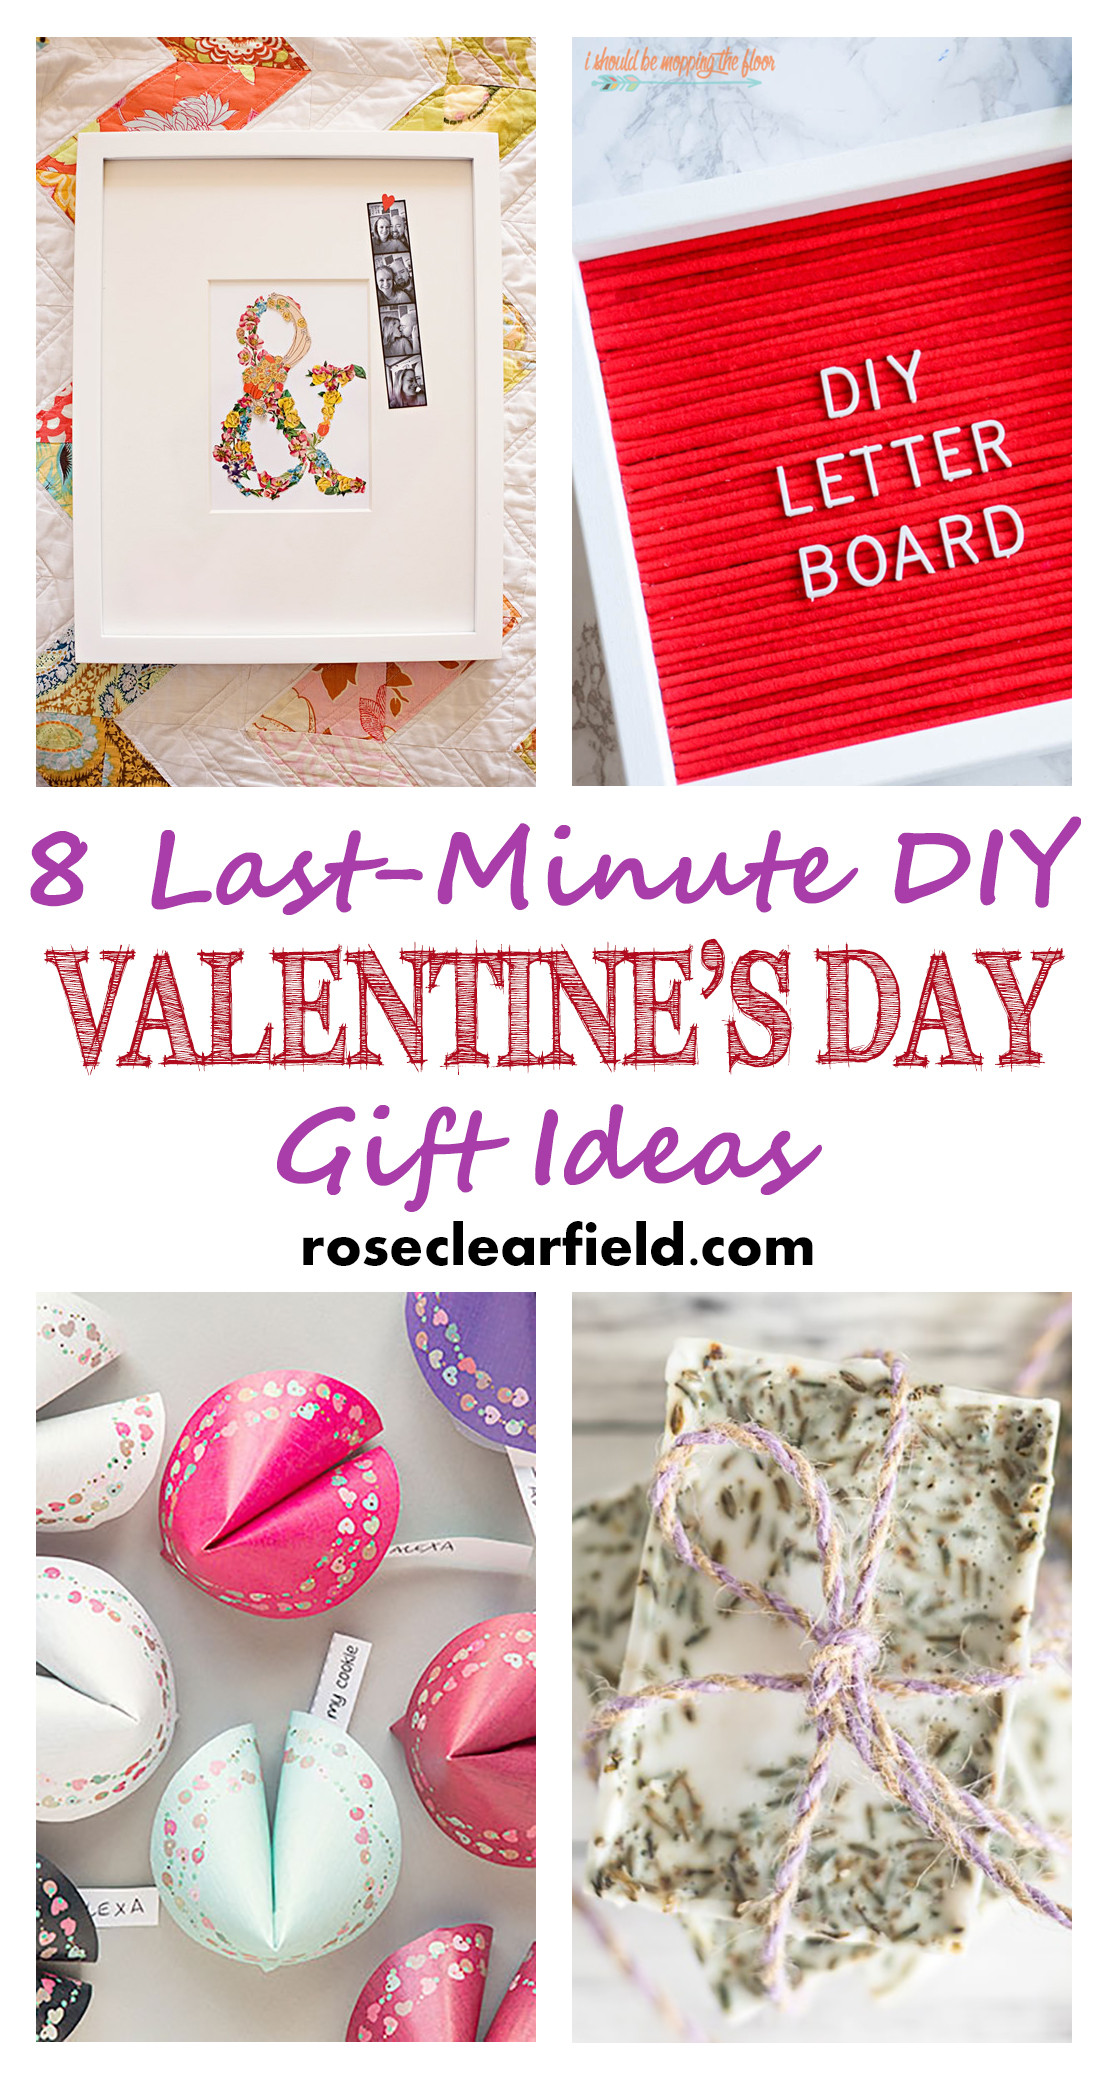 Valentine Ideas Gift
 Last Minute DIY Valentine s Day Gift Ideas • Rose Clearfield